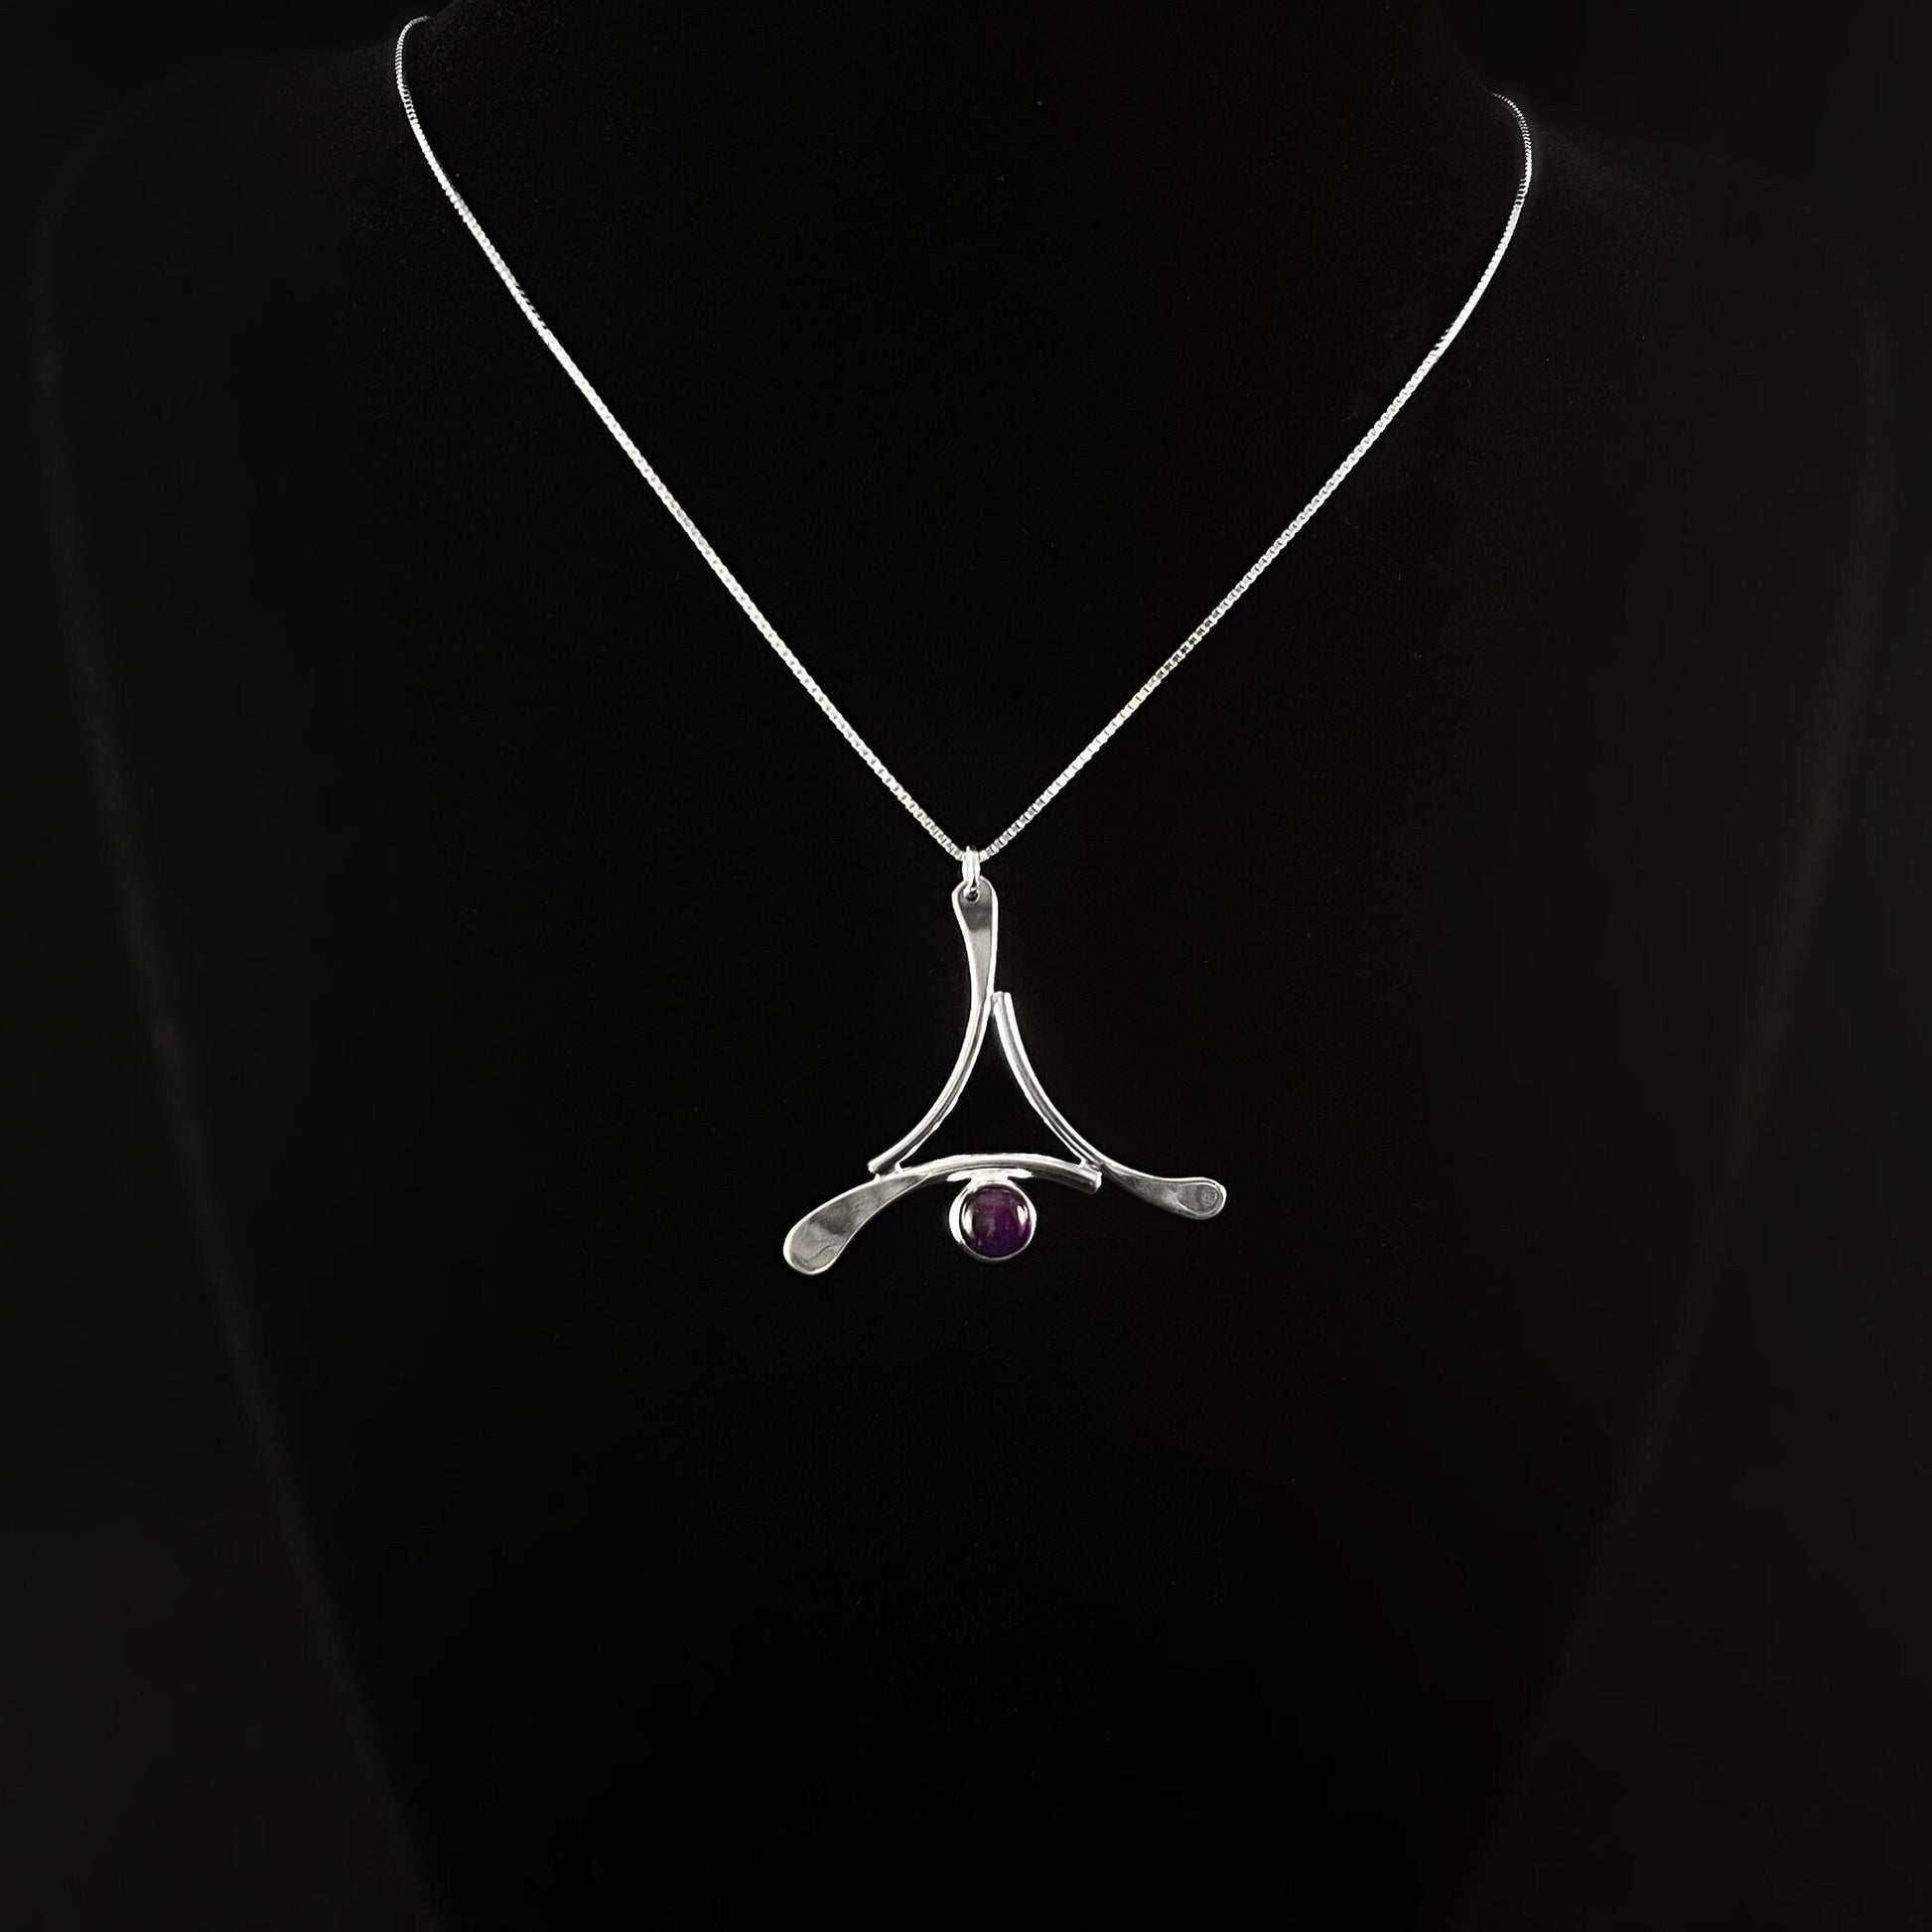 Handmade Sterling Silver Flat Forged Triangle Purple Stone Pendant Necklace, Made in USA - Reflections